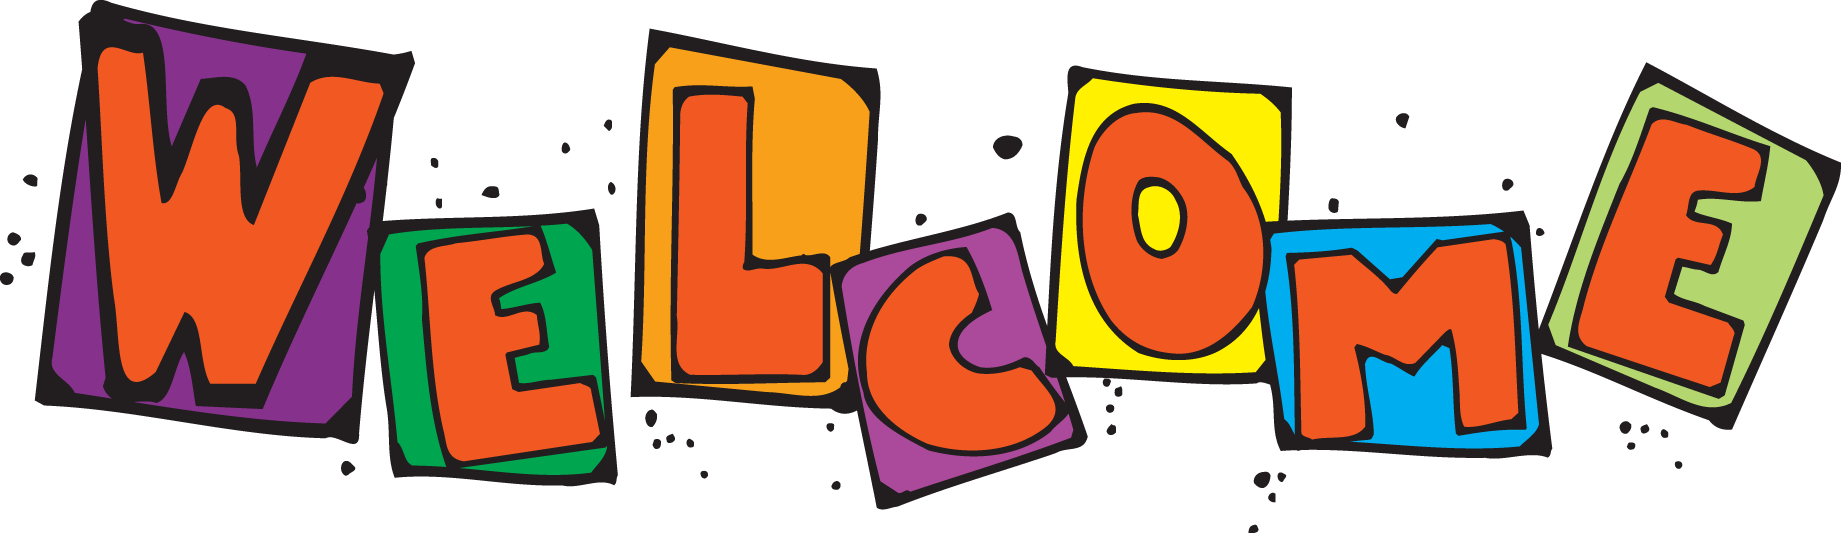 Welcome Word PNG HD Quality